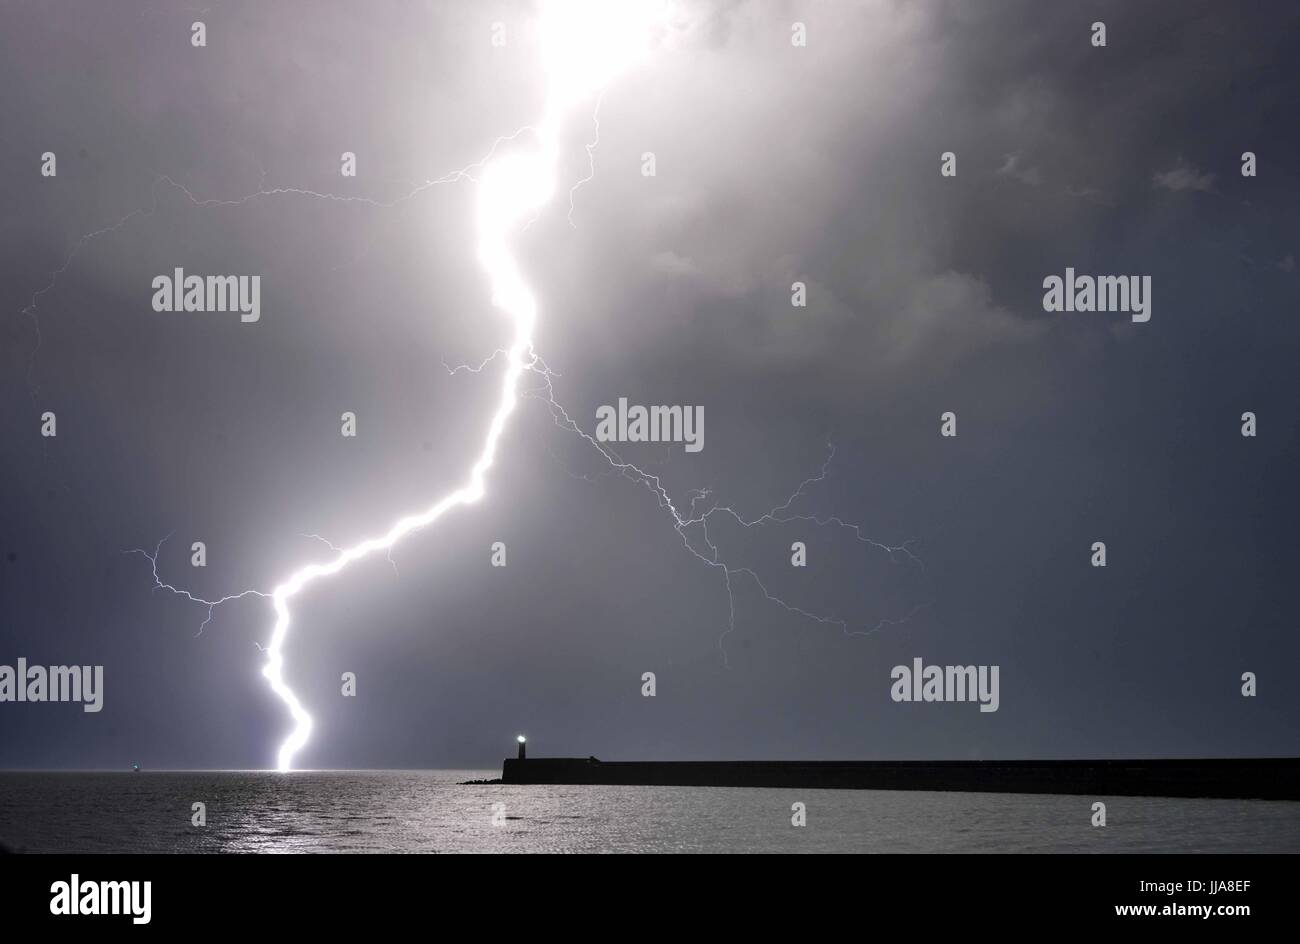 Newhaven, East Sussex. 19th July 2017. Dramatic display of lightning over the English Channel as summer storms bring torrential rain to the South East. © Peter Cripps/Alamy Live News Stock Photo